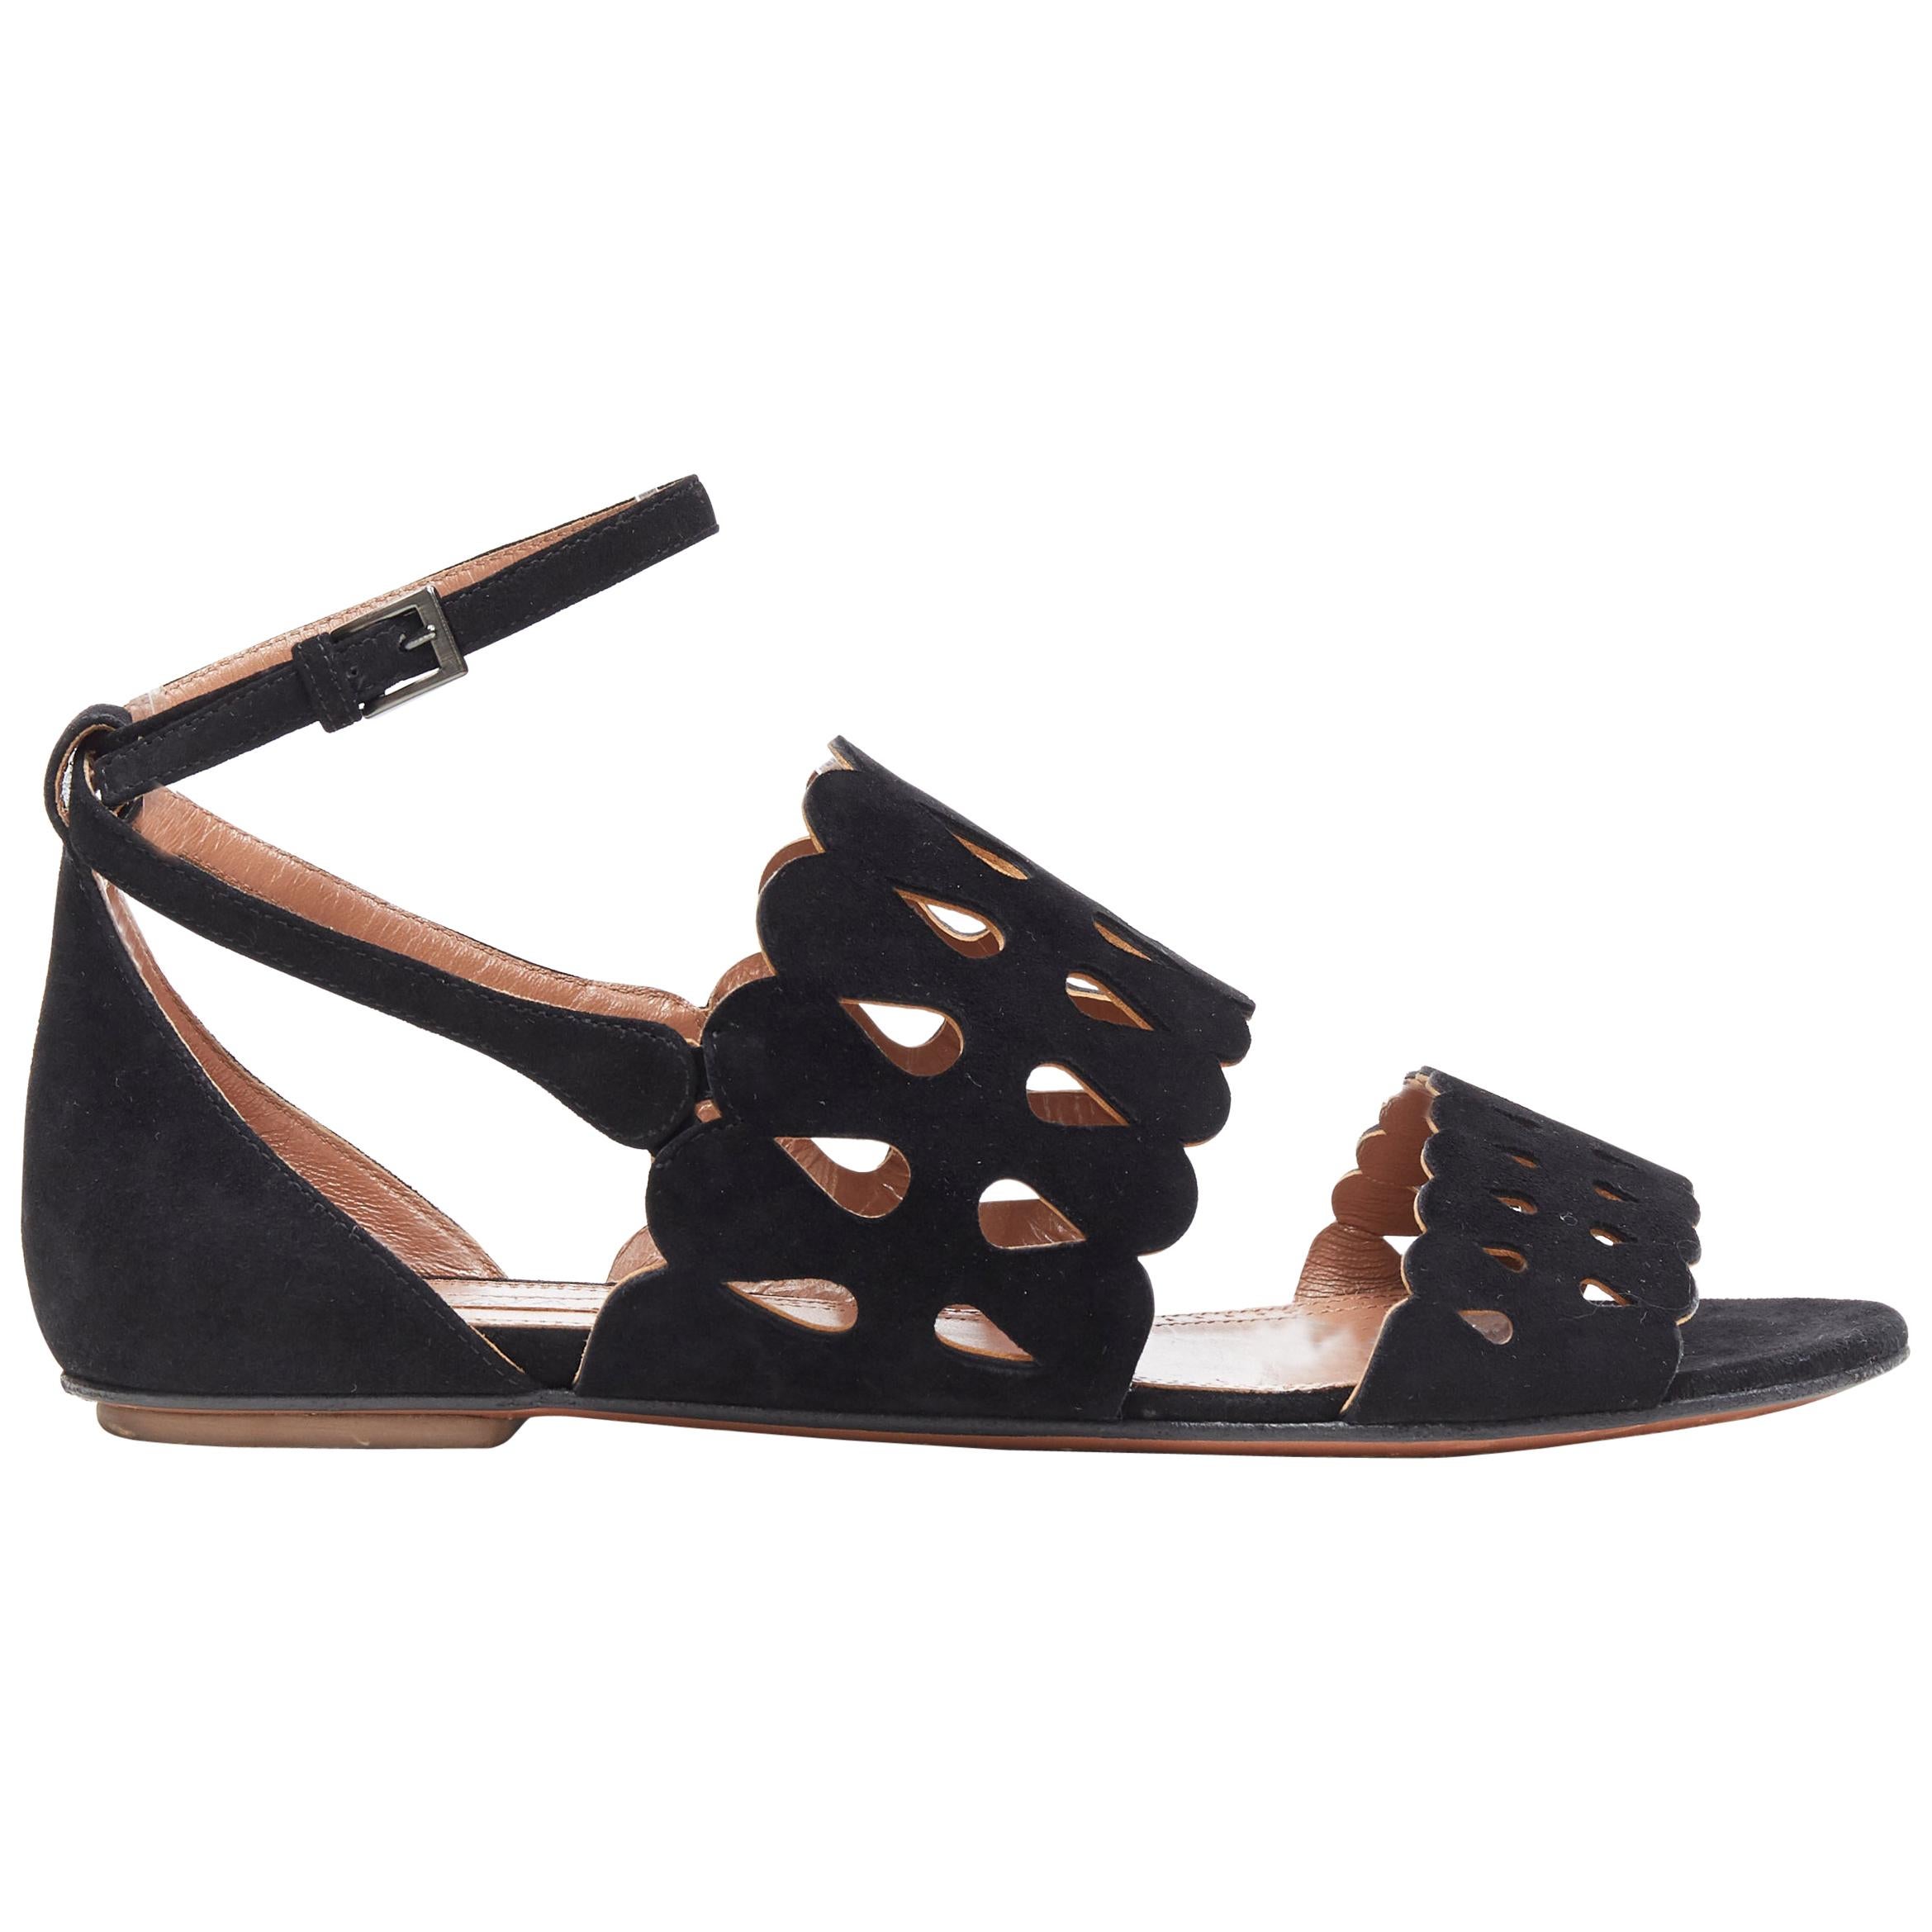 ALAIA black suede squiggly cut out strap open toe ankle wrap flat sandals EU37